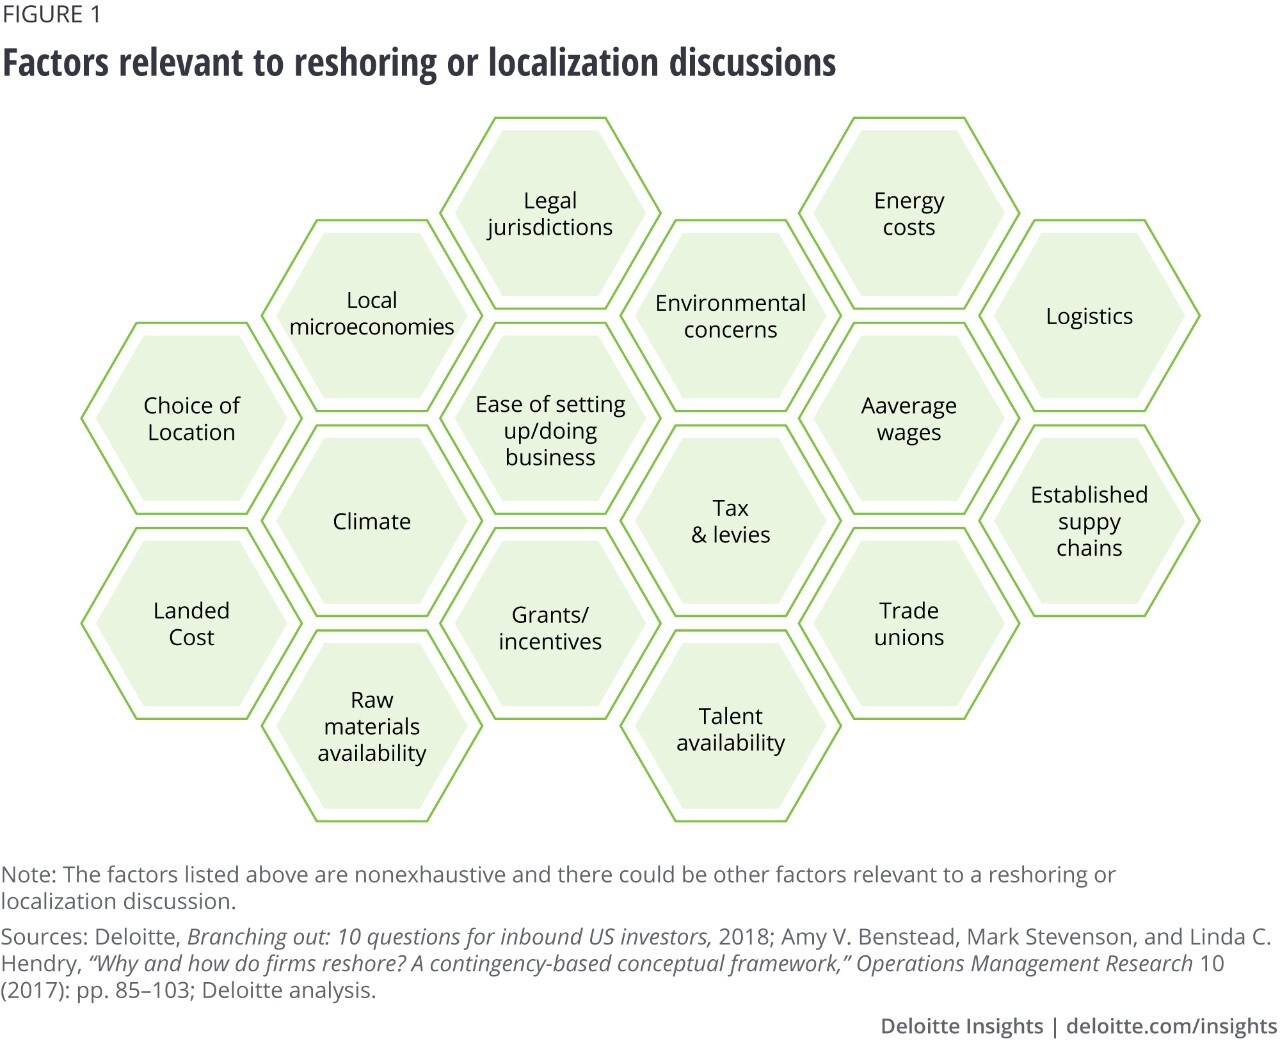 Figure 1. Factors relevant to reshoring or localization discussions